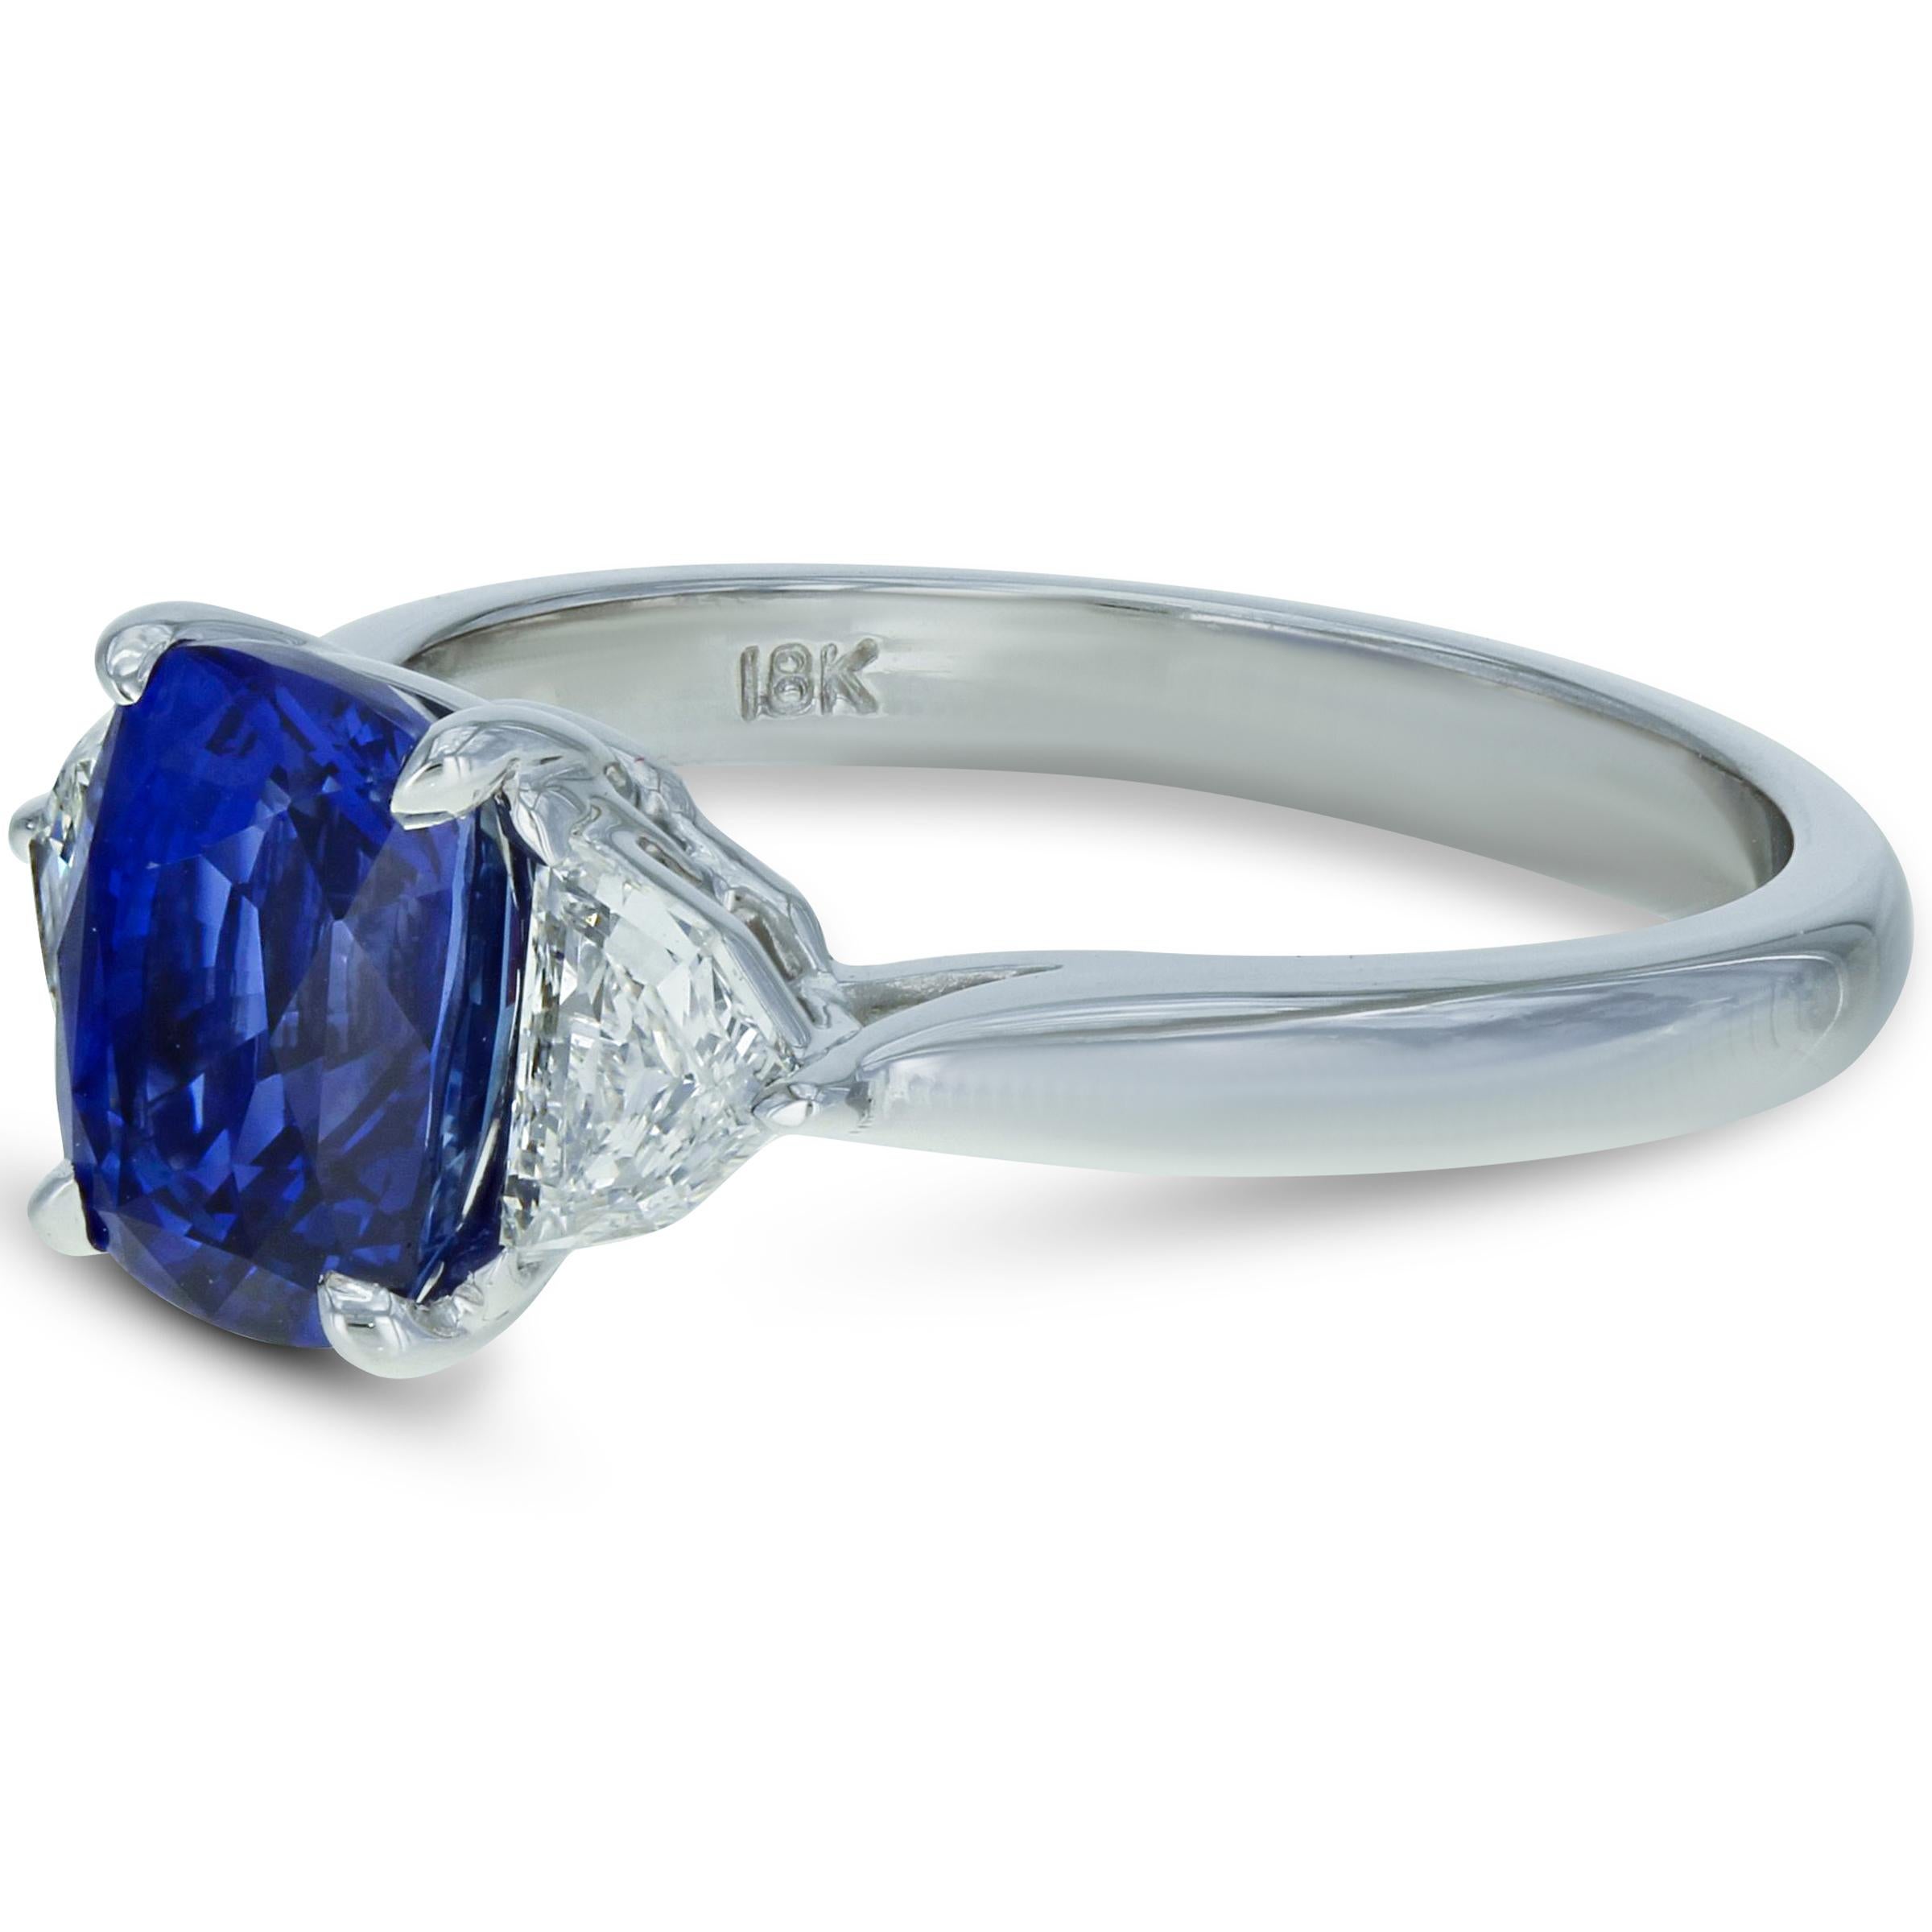 Sri Lanka Blue Sapphire And Diamond Engagement Ring 3.34cttw 18K White Gold GIA

Details:
Royal blue sapphire diamond engagement ring.
Sri Lanka sapphires are probably the worlds most famous and sought after sapphires due to the color in the blues